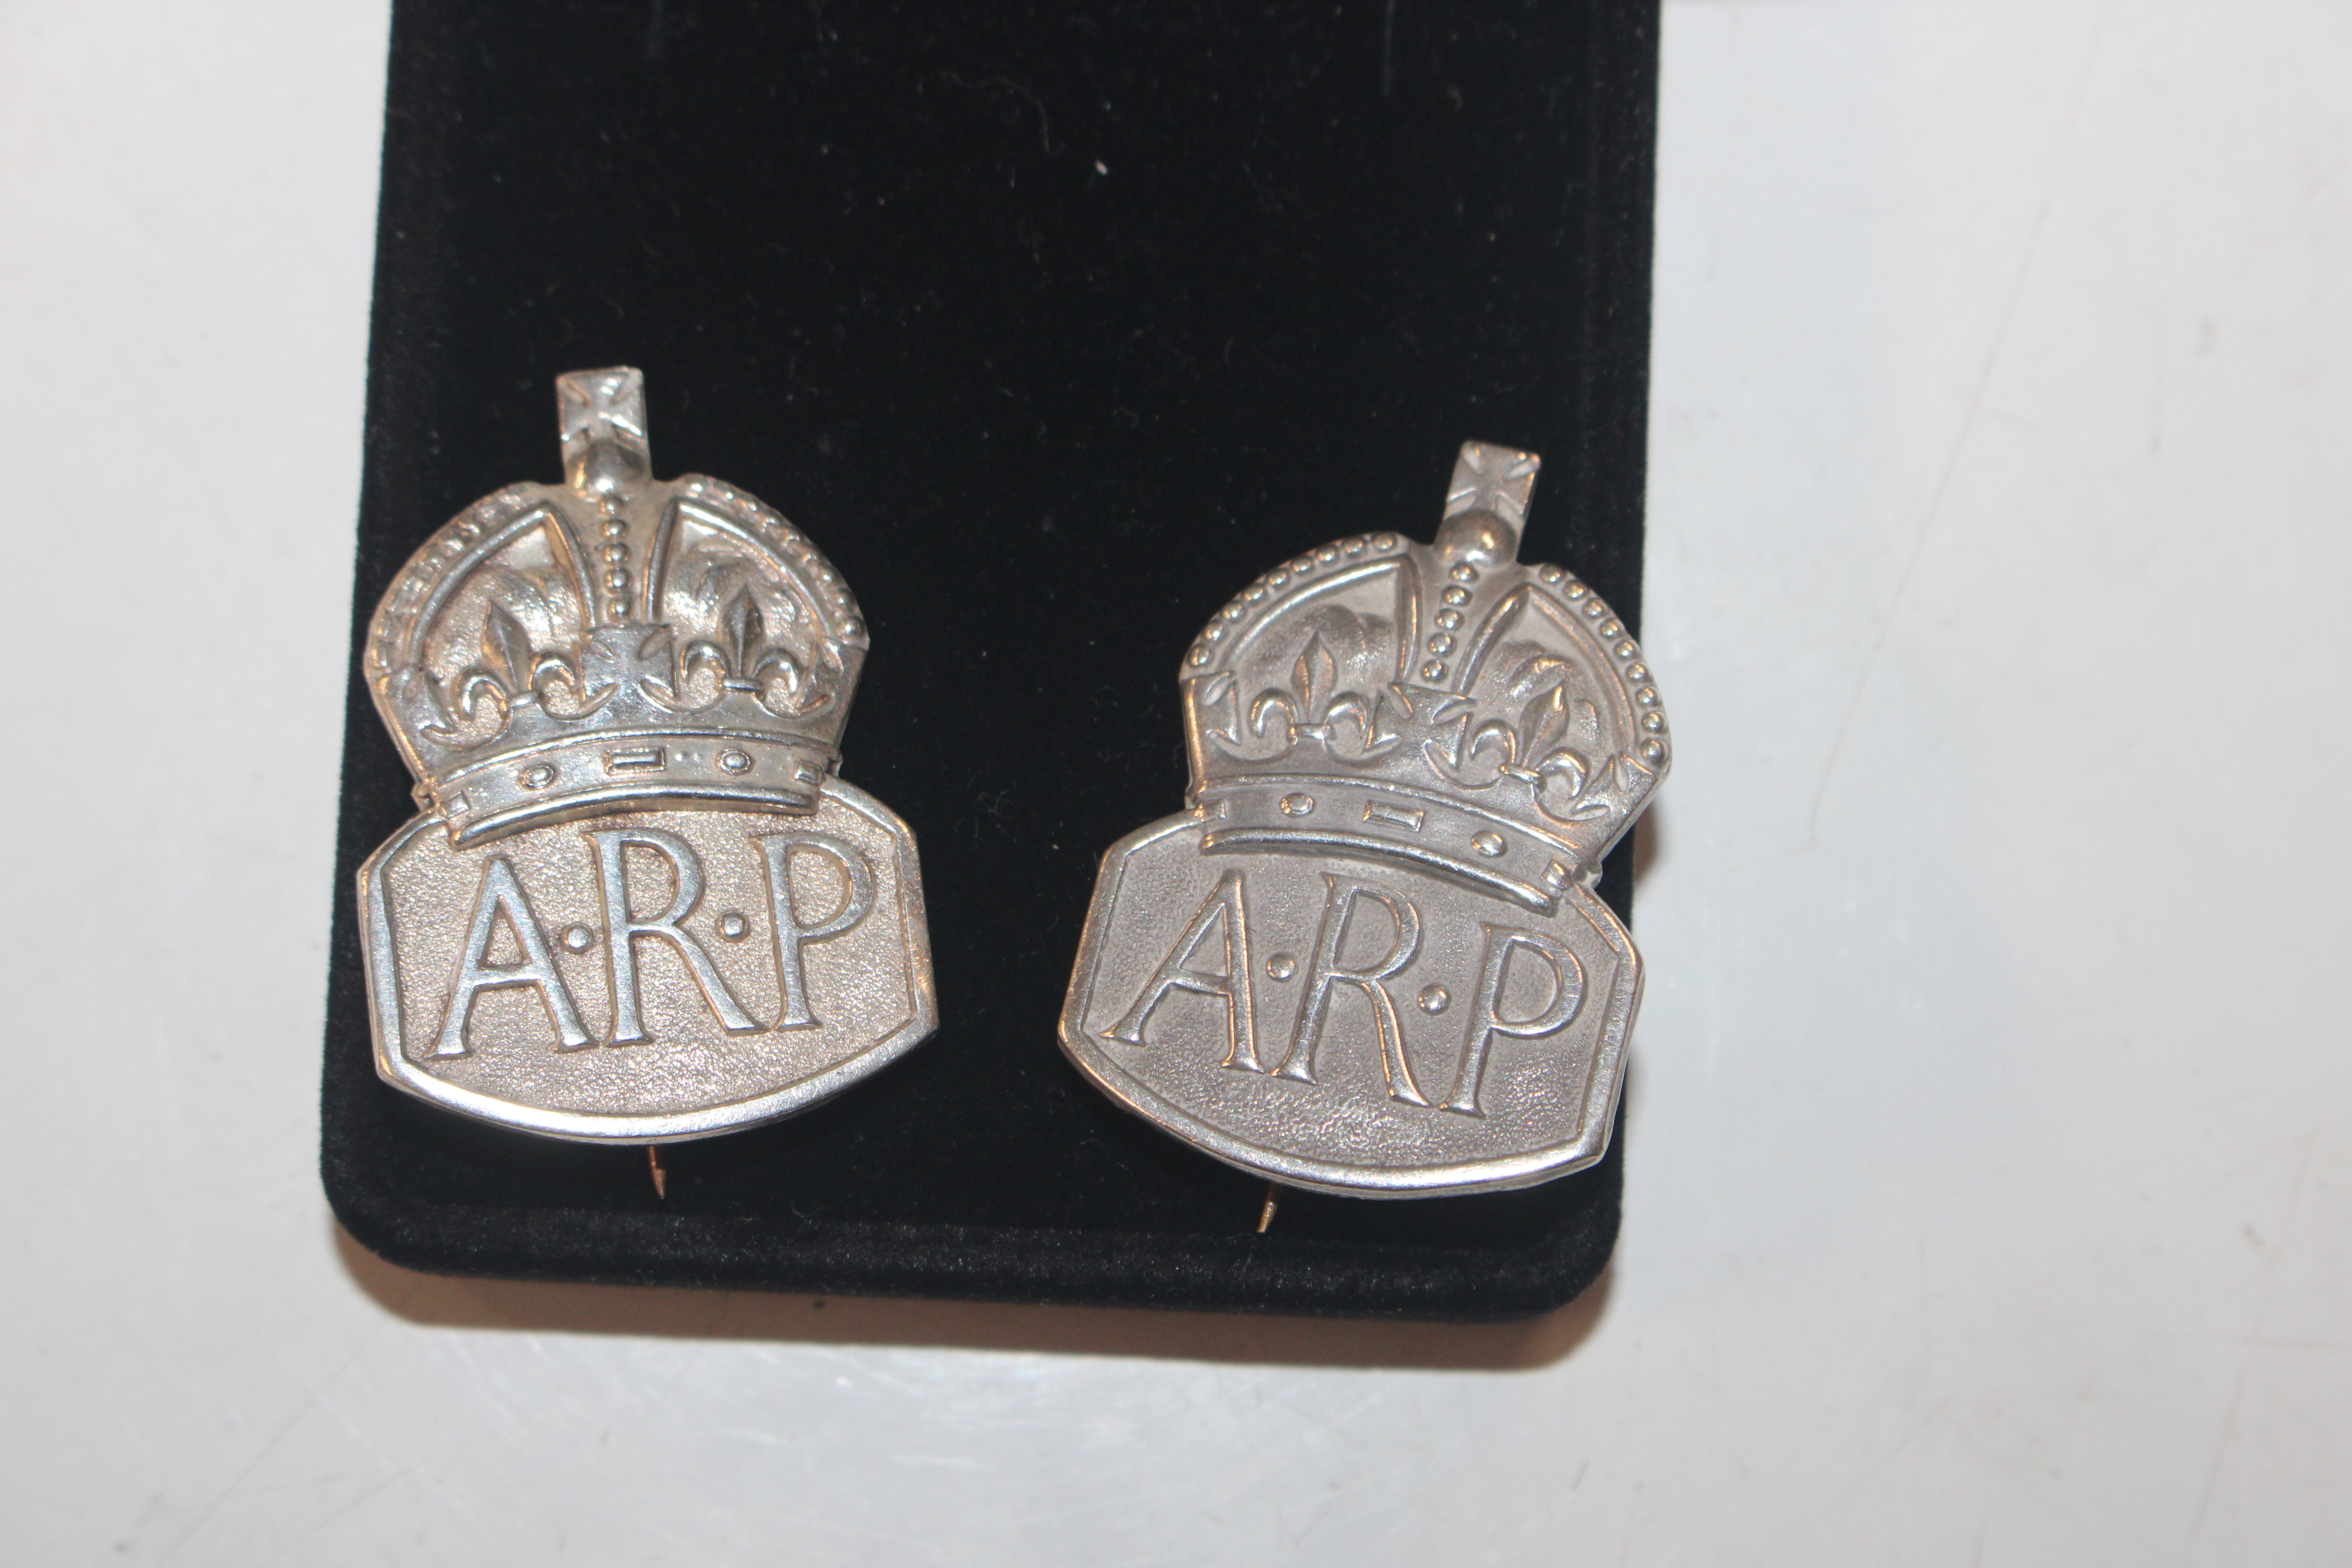 Two 1937 London Mint Sterling silver ARP badges, a